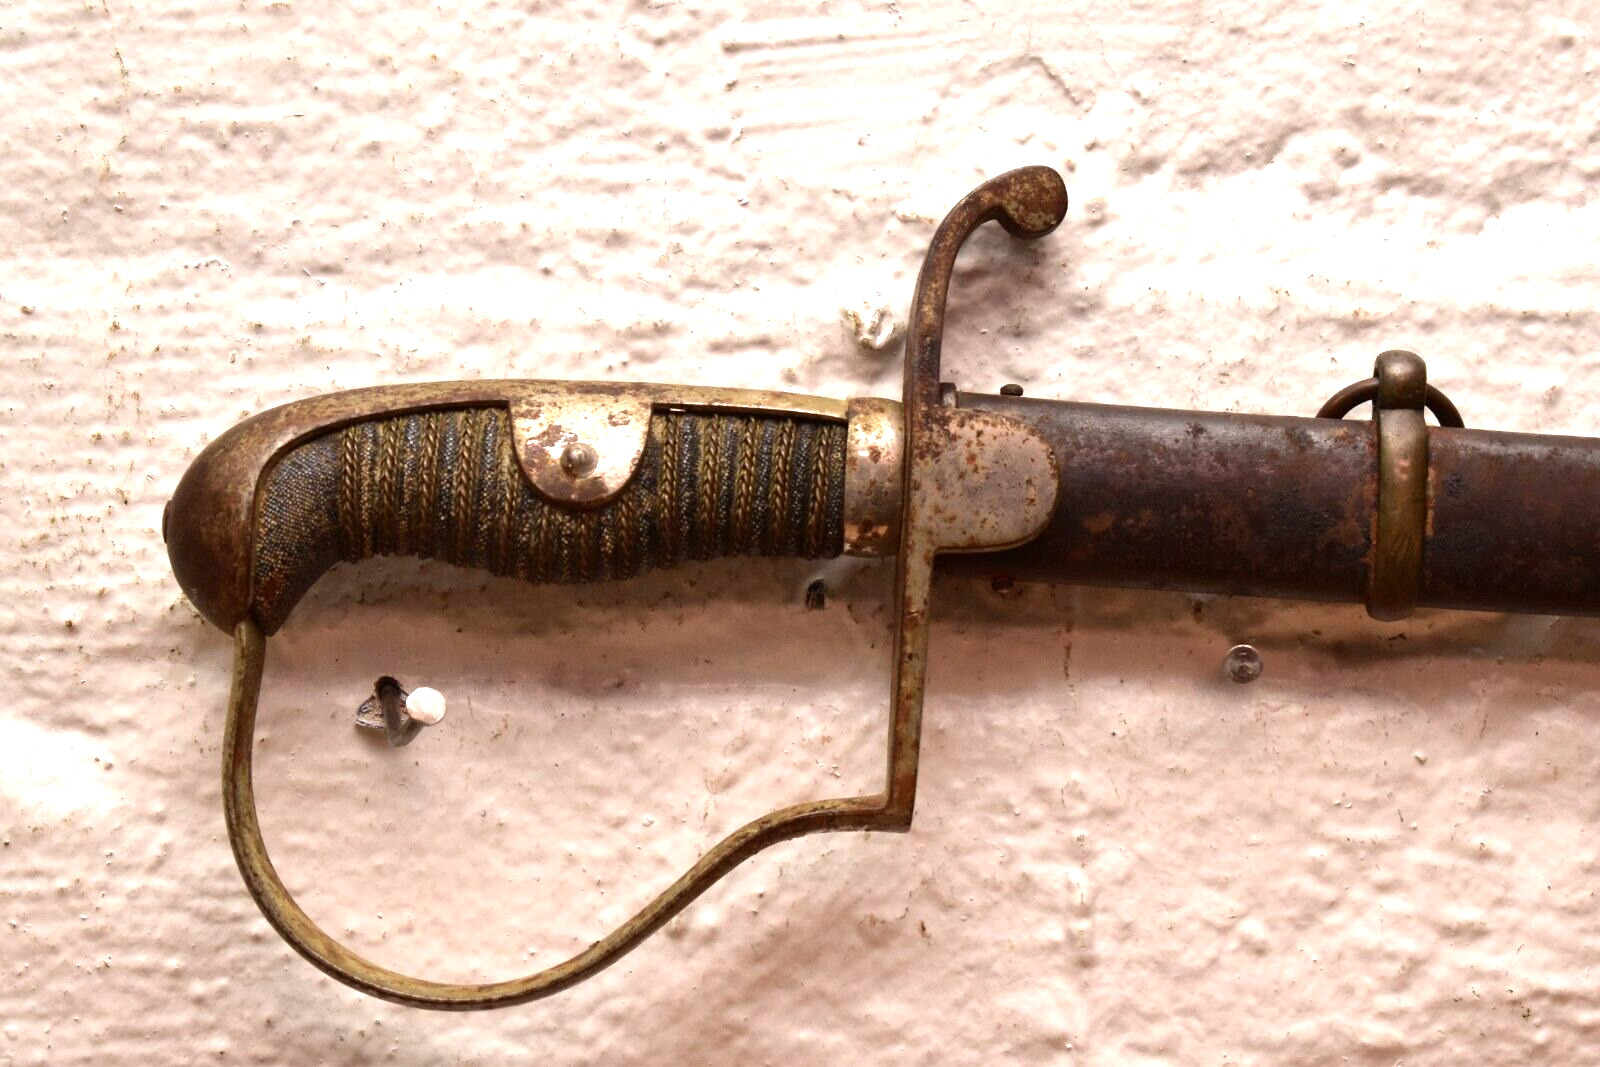 German Germany Antique Old WW1 Cavalry Officers Sword WWI VTG Military Saber]